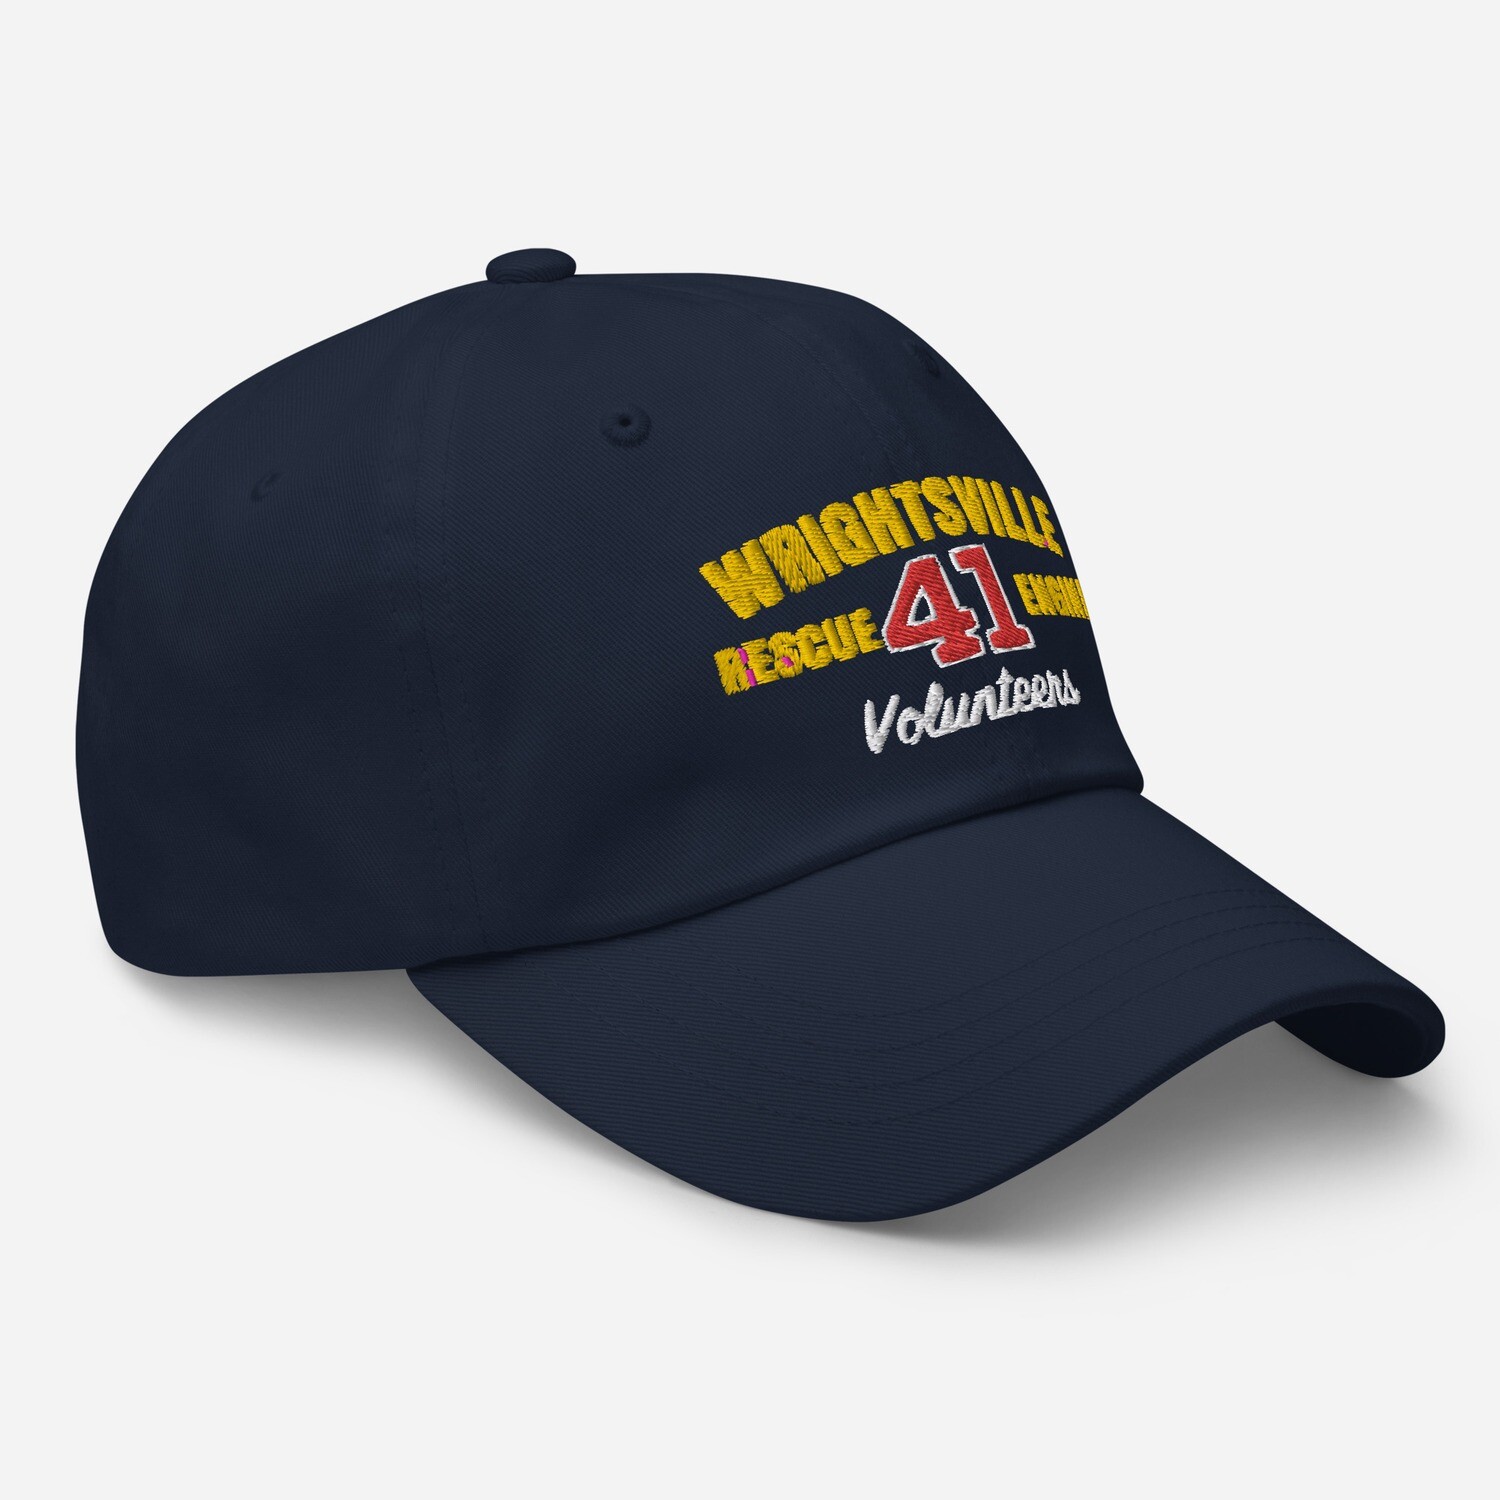 Wrightsville FD embroidered low profile hat